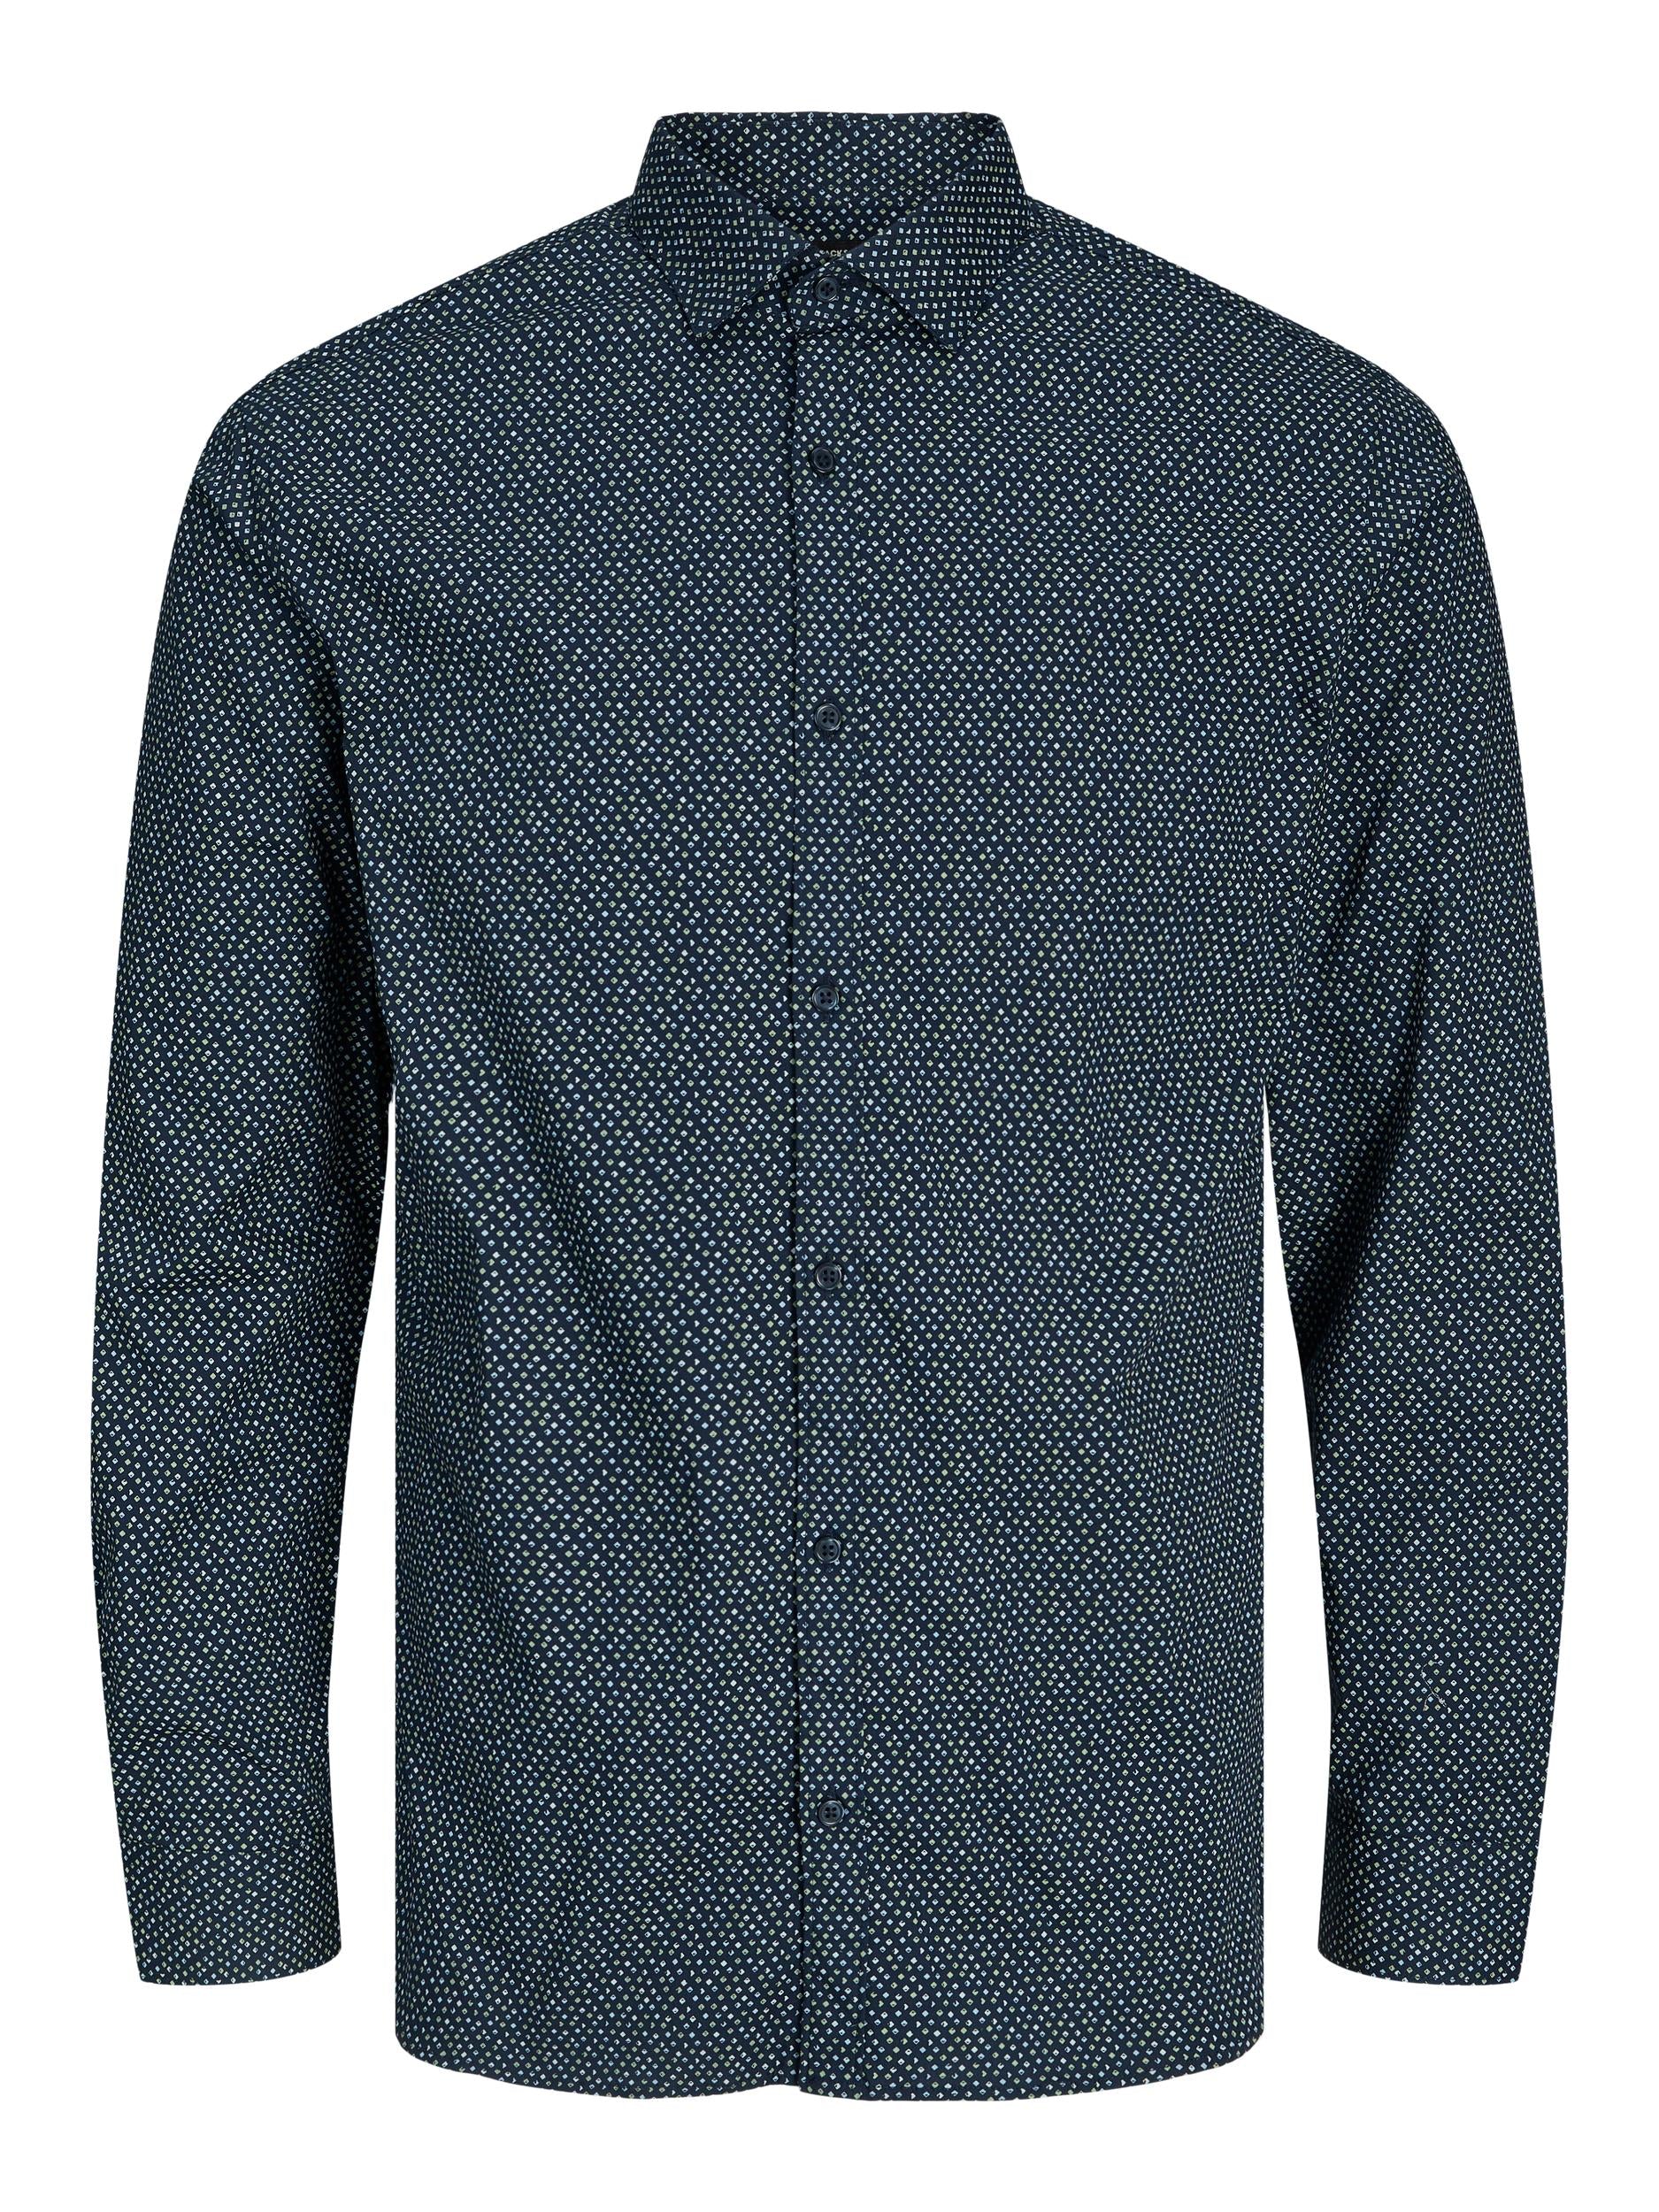 Men's Blackpool Stretch Shirt Long Sleeve Perfect Navy-Ghost Front View